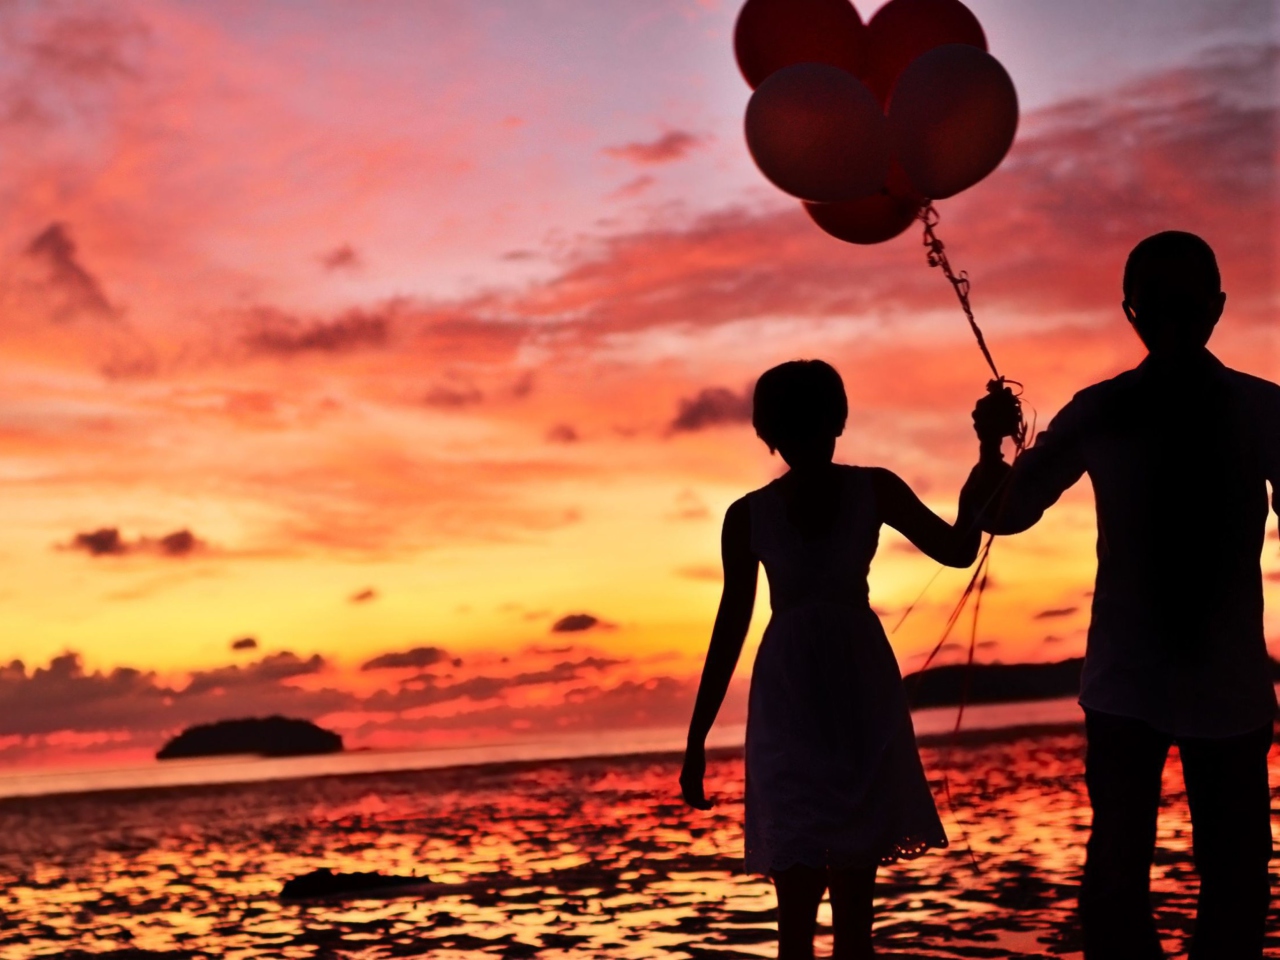 Couple With Balloons Silhouette At Sunset wallpaper 1280x960